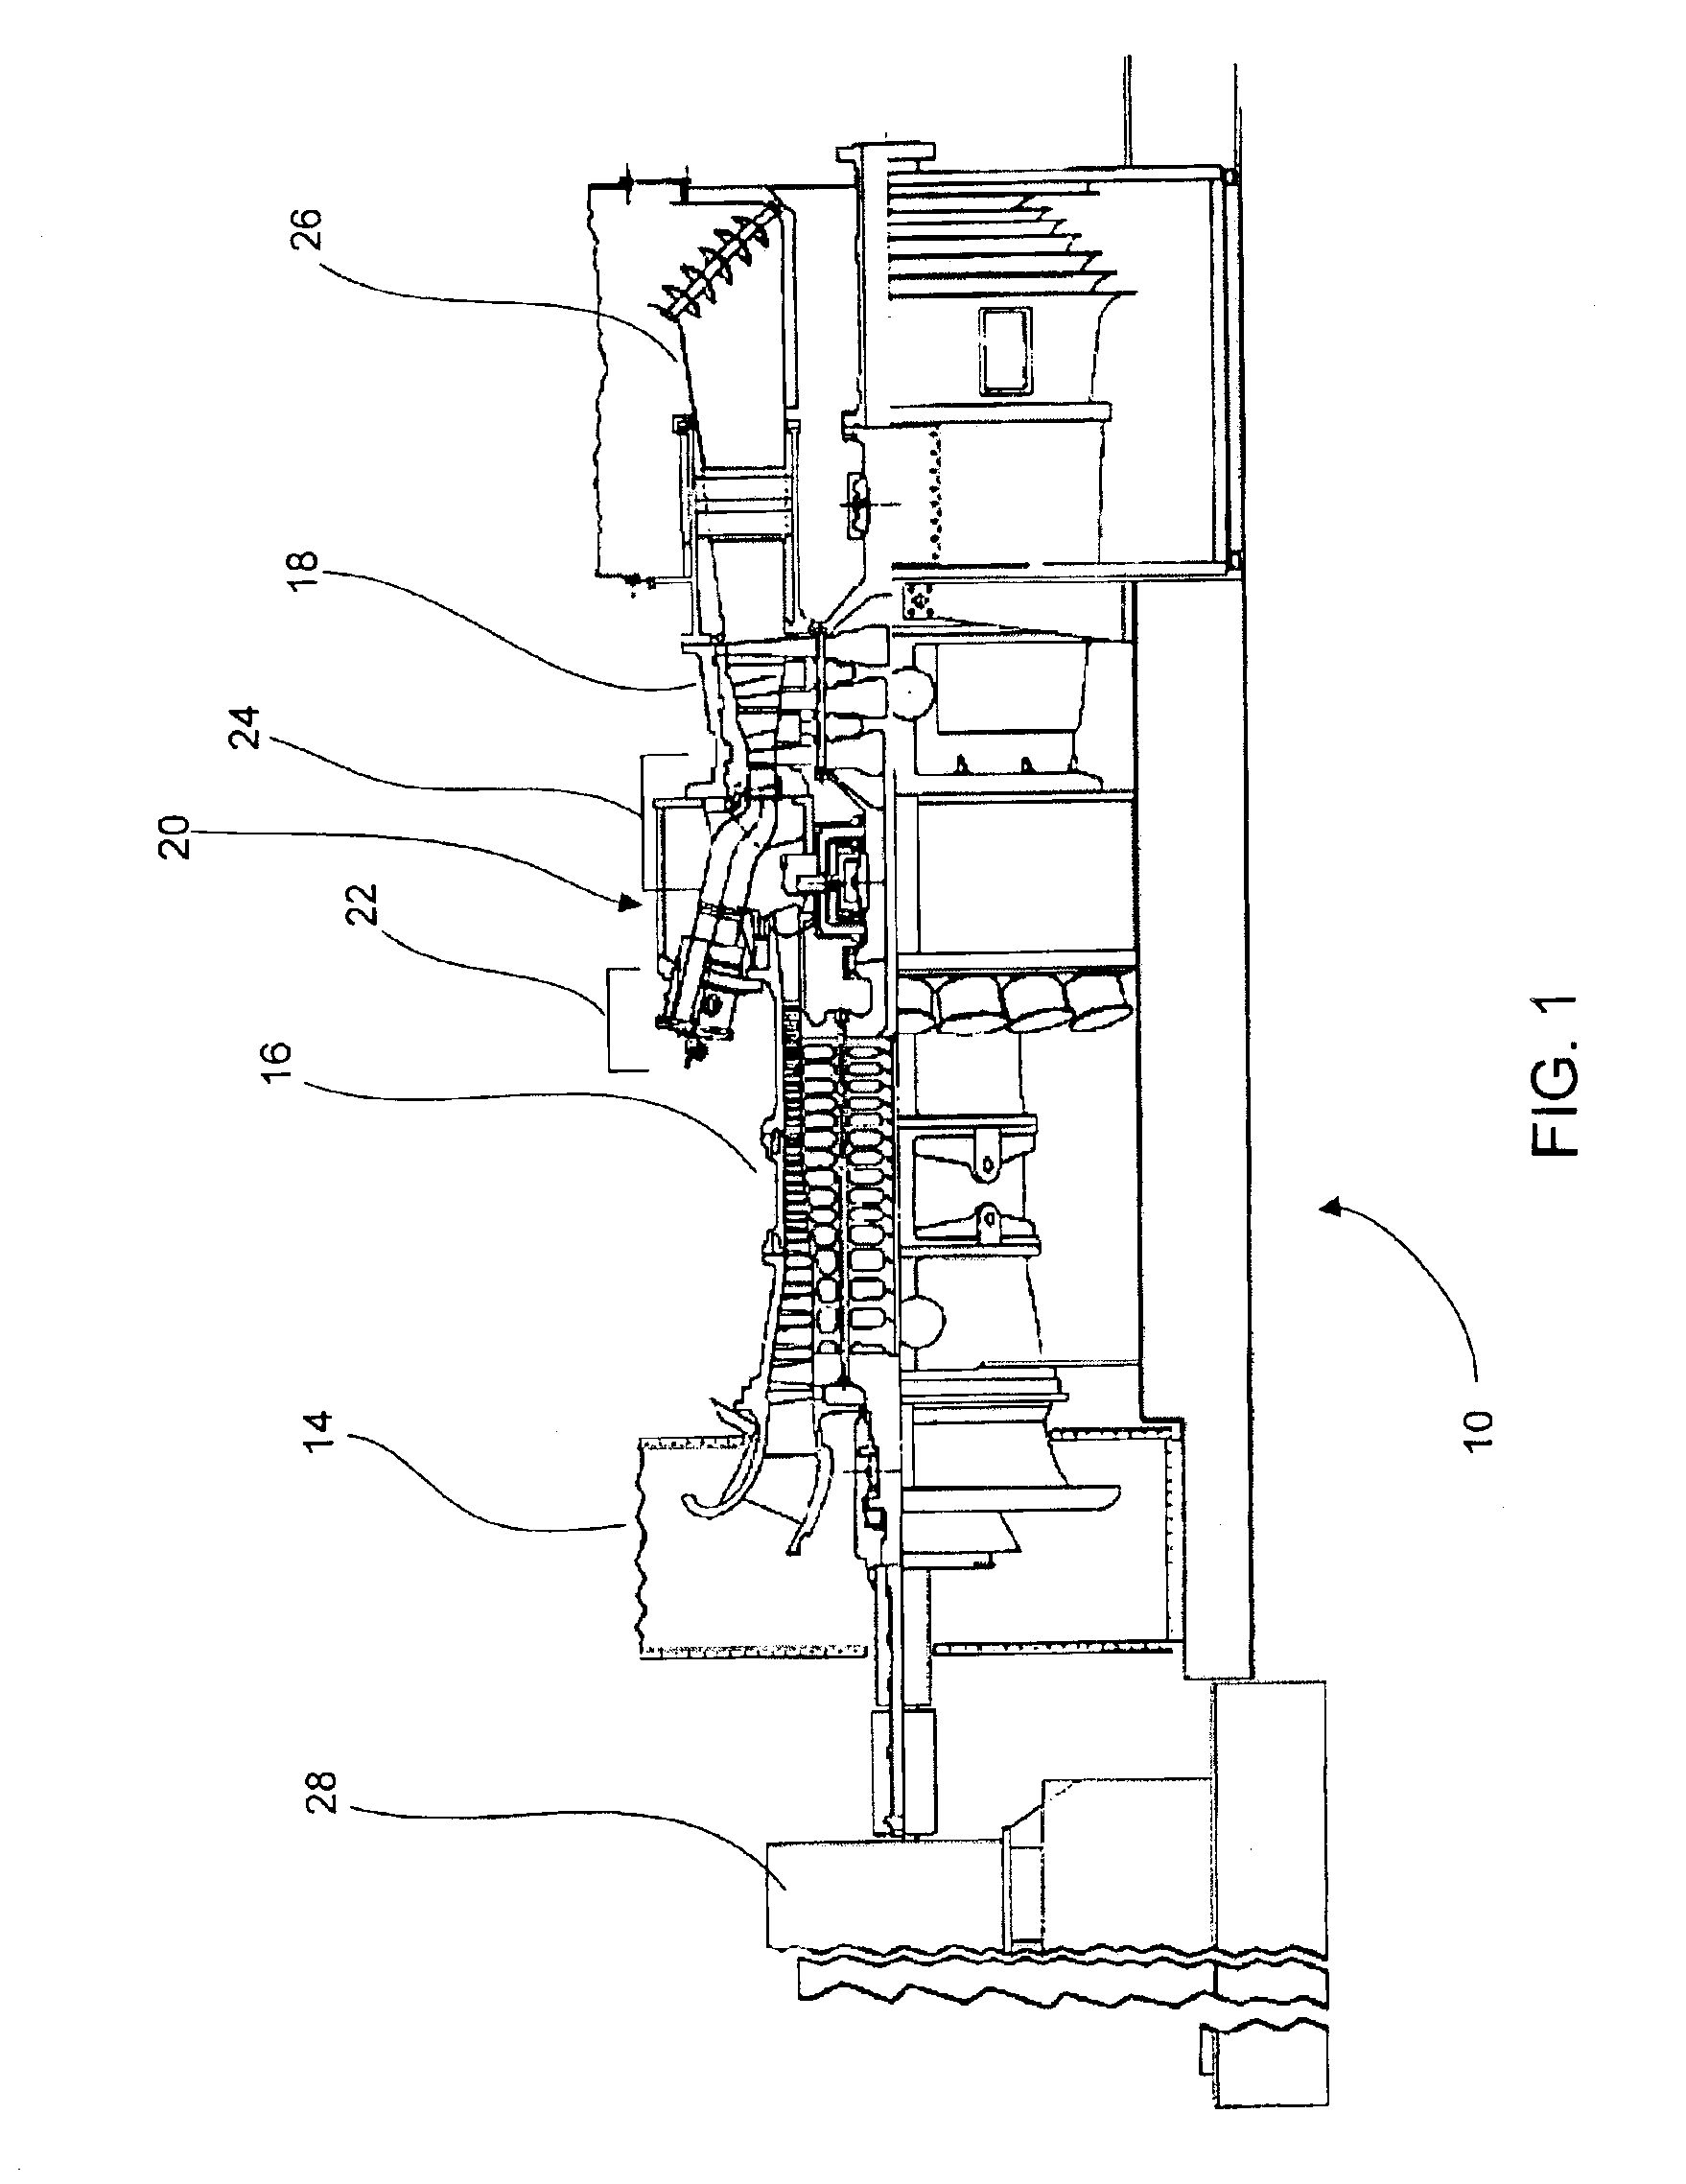 Turbine containing system and an injector therefor